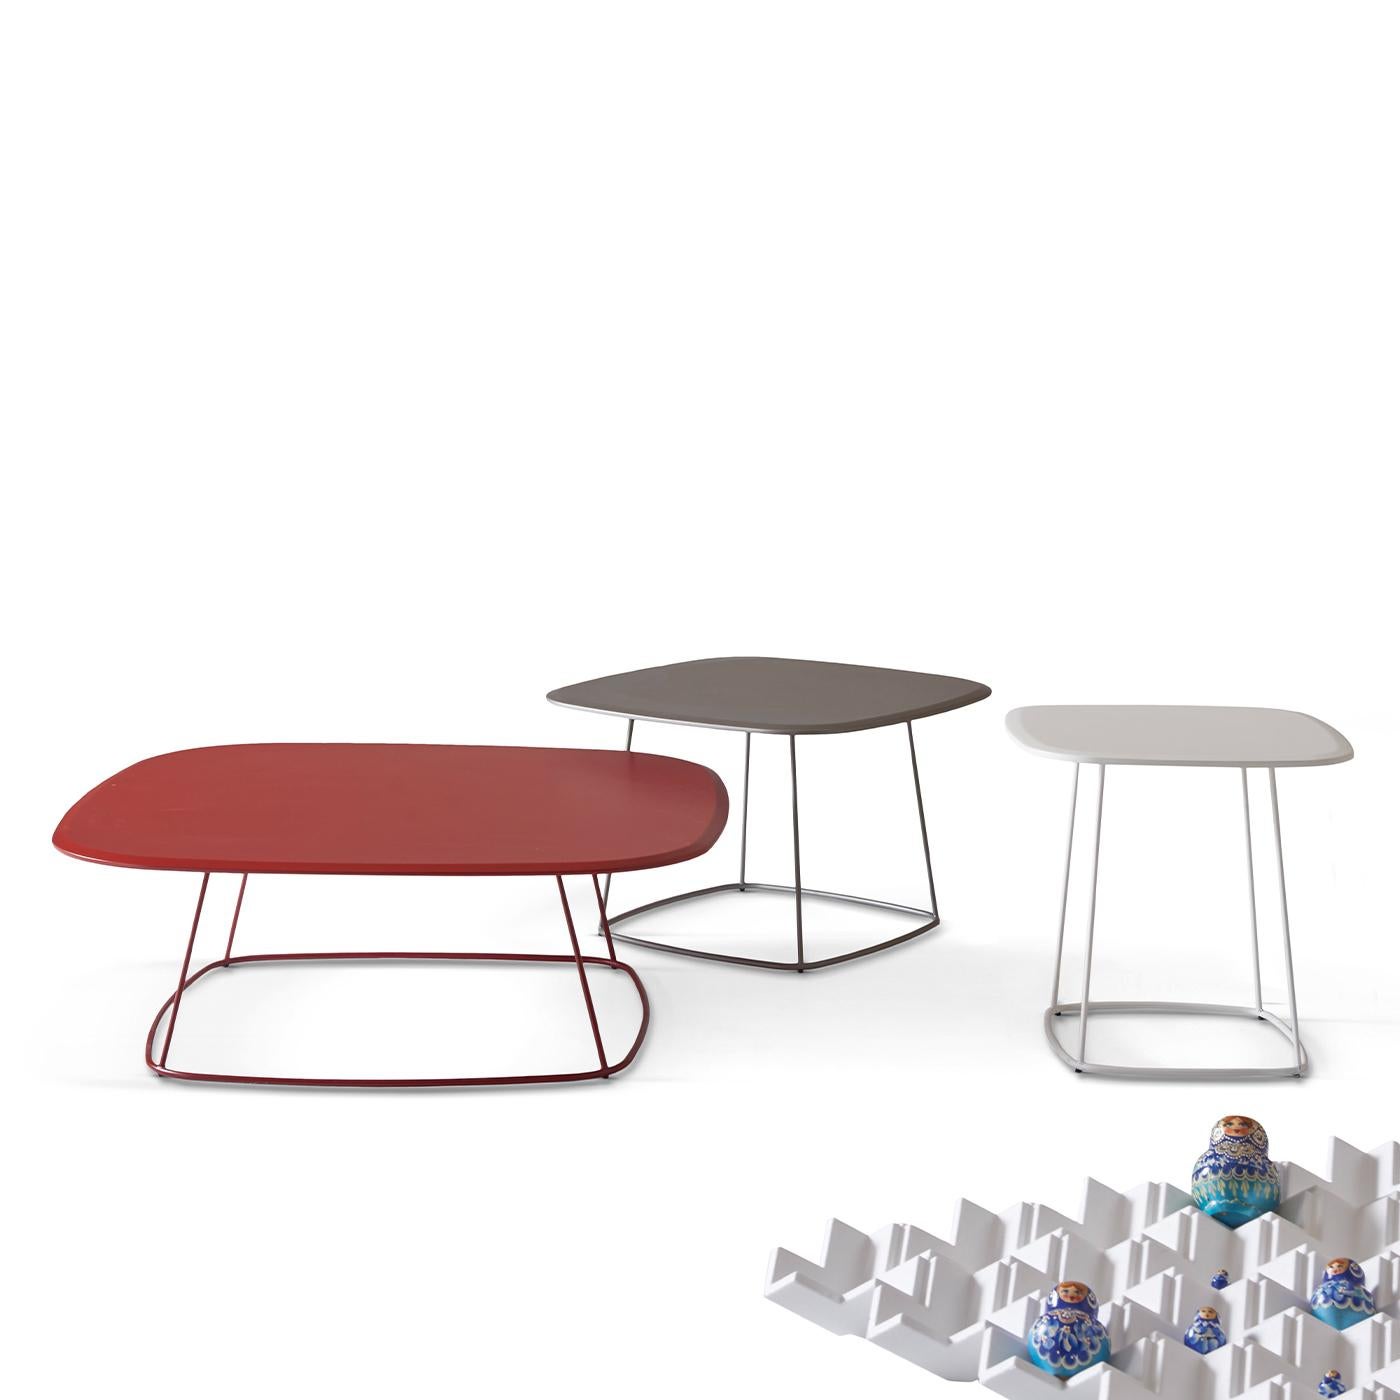 The Freestyle Coffee Table by Angeletti Ruzza is a spectacular piece of minimalist design, defined by clean and essential lines. Its smooth and sleek profile is enhanced with a matte red lacquer coloring the MDF top, which sturdily rests on a thin